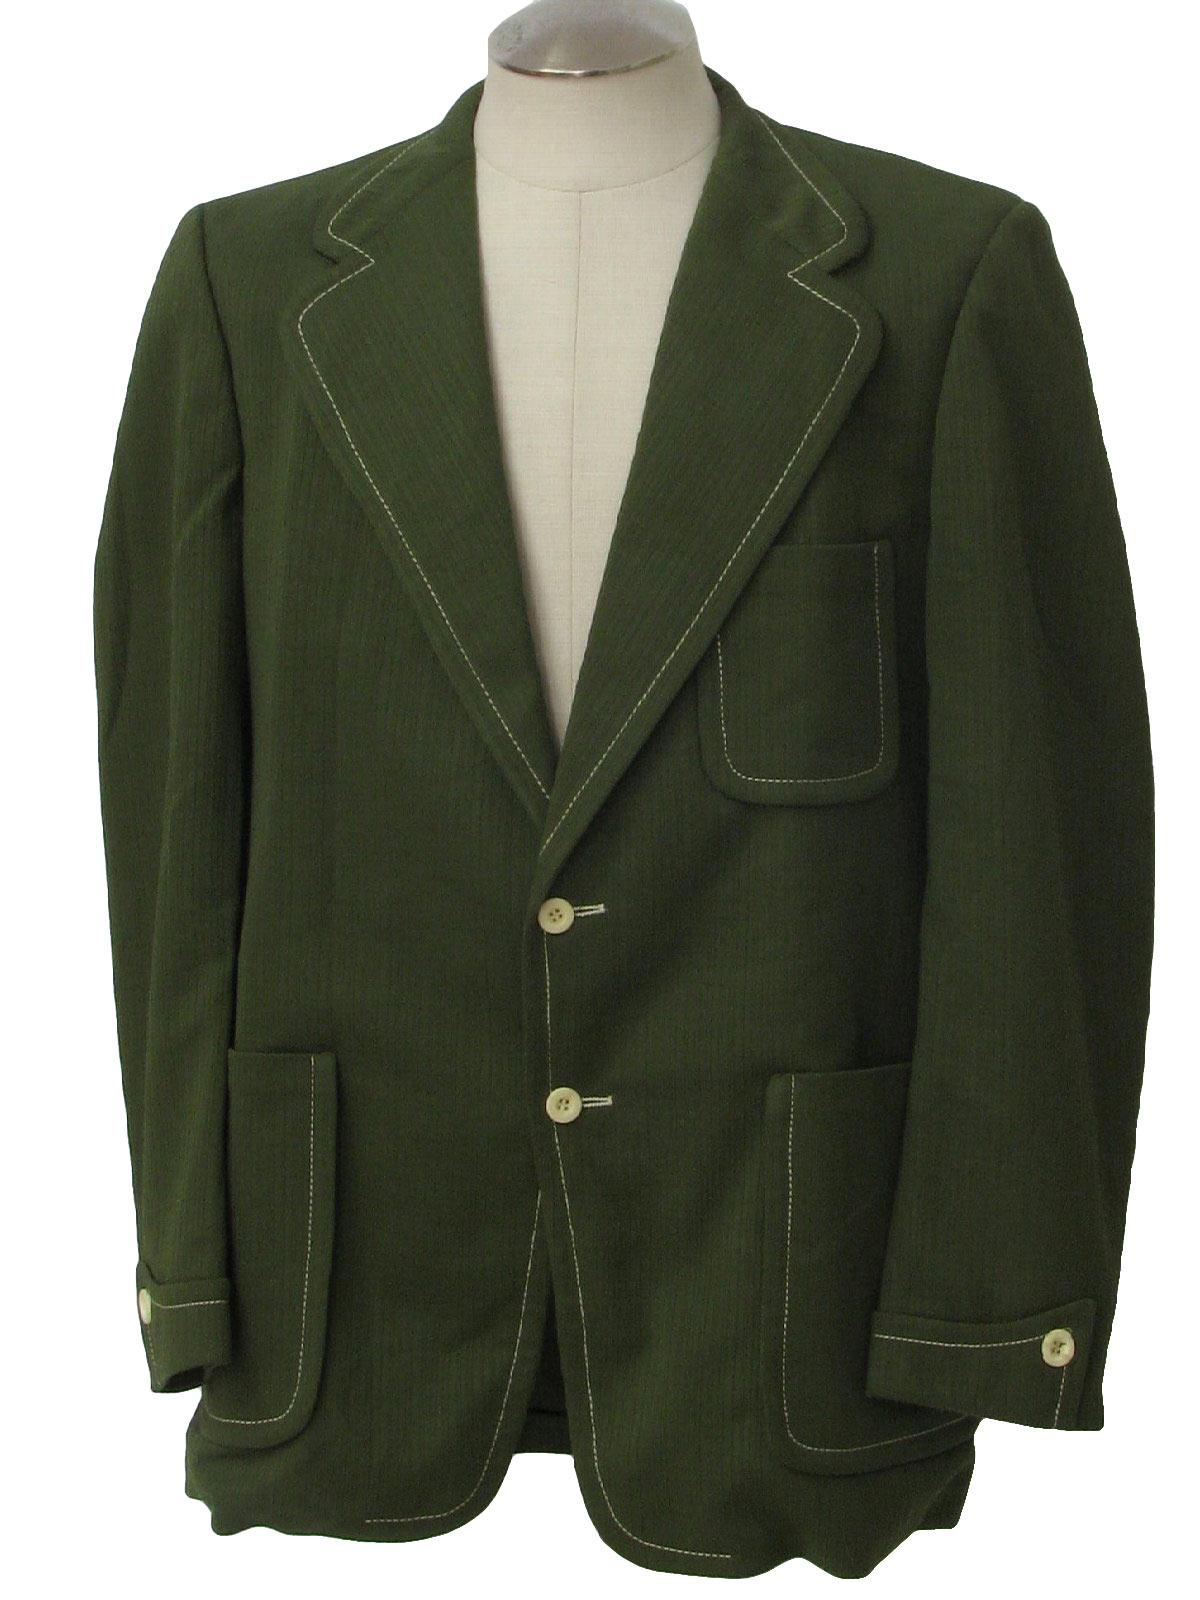 1970's Retro Jacket: 70s -JCPenney- Mens rich olive green textured ...